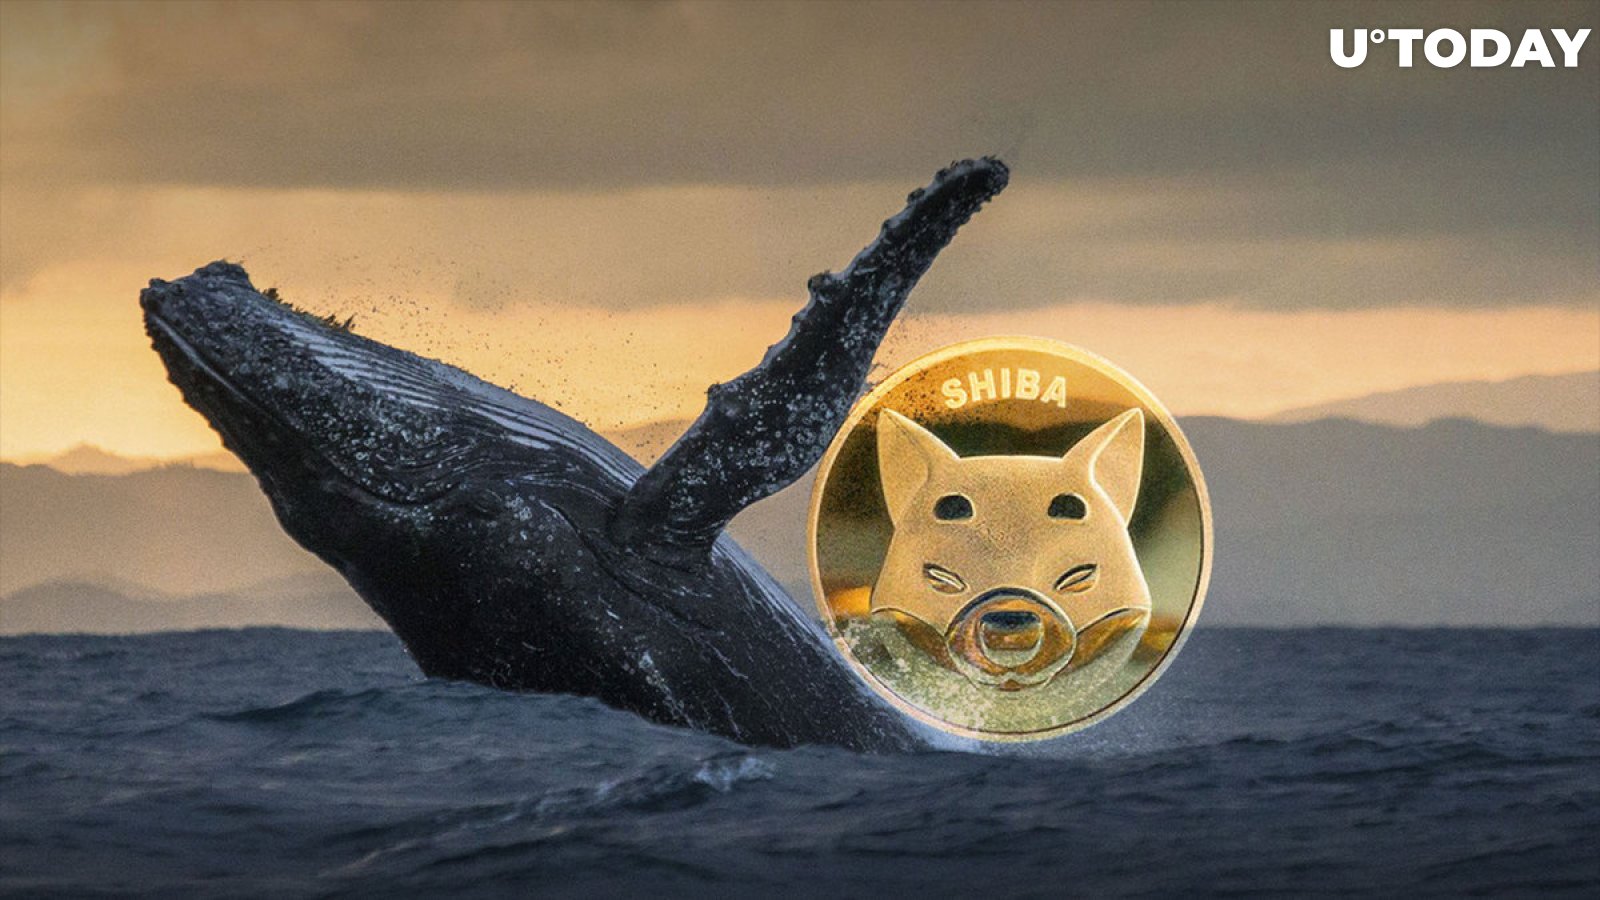 1.7 Trillion SHIB Dumped by Top Whales, Here's Why They May Regret This